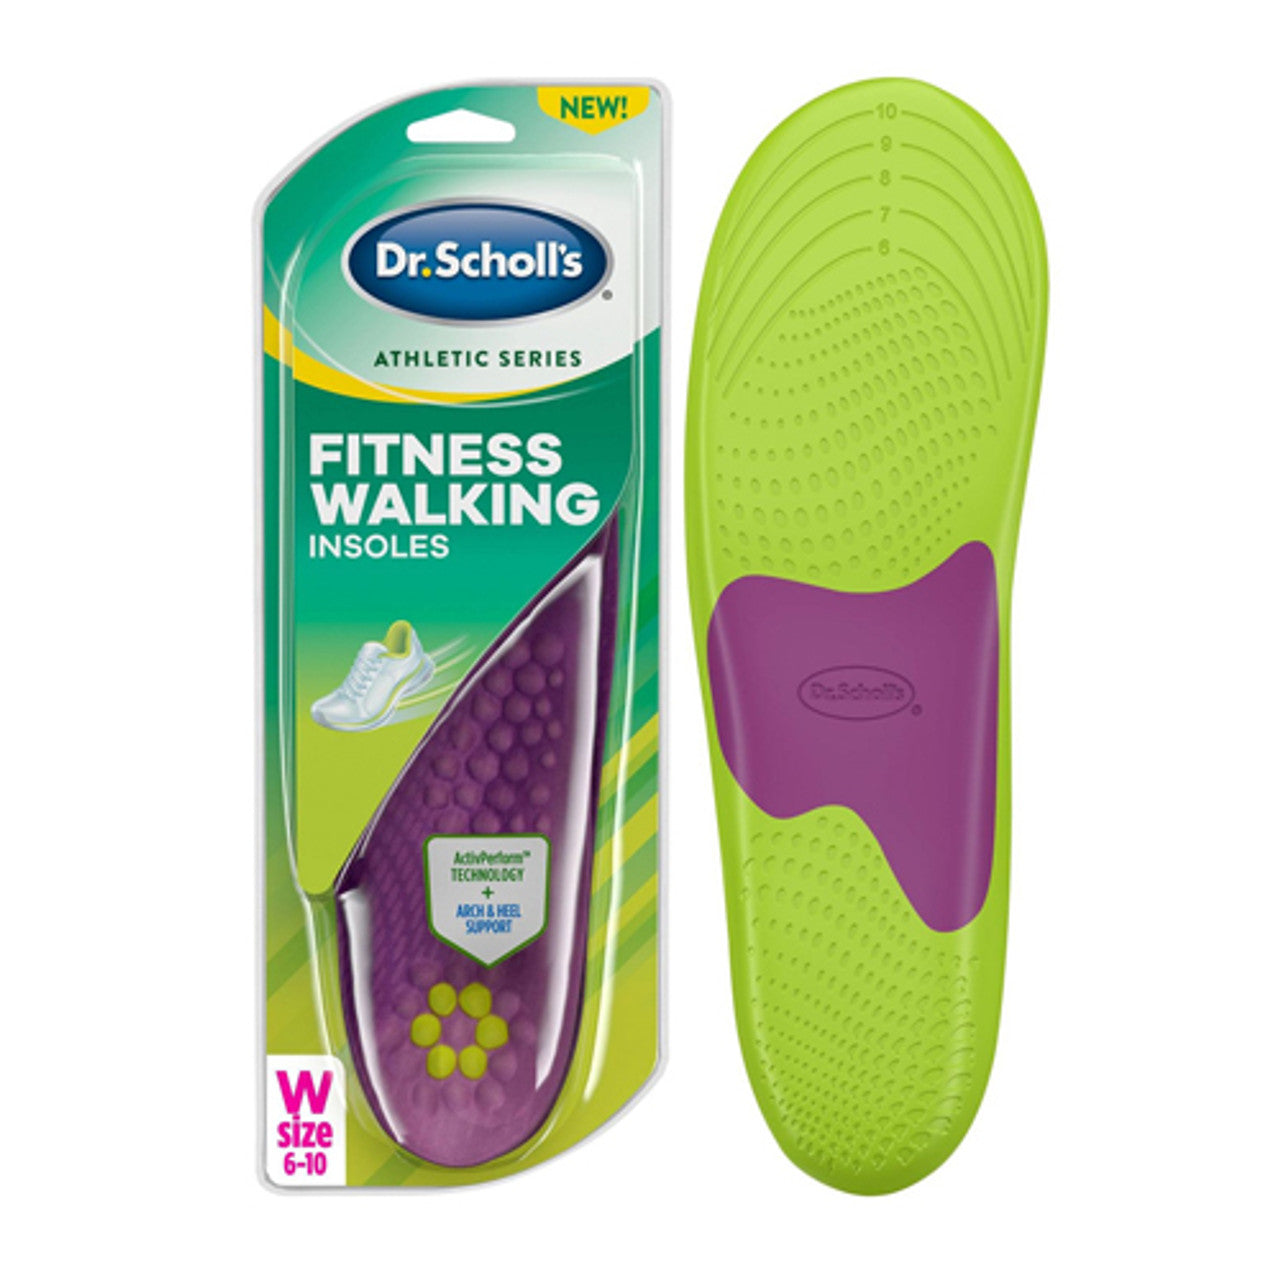 Dr Scholls Athletic Series Fitness Walking Insoles For Women 6-10 Size, 1 Pair